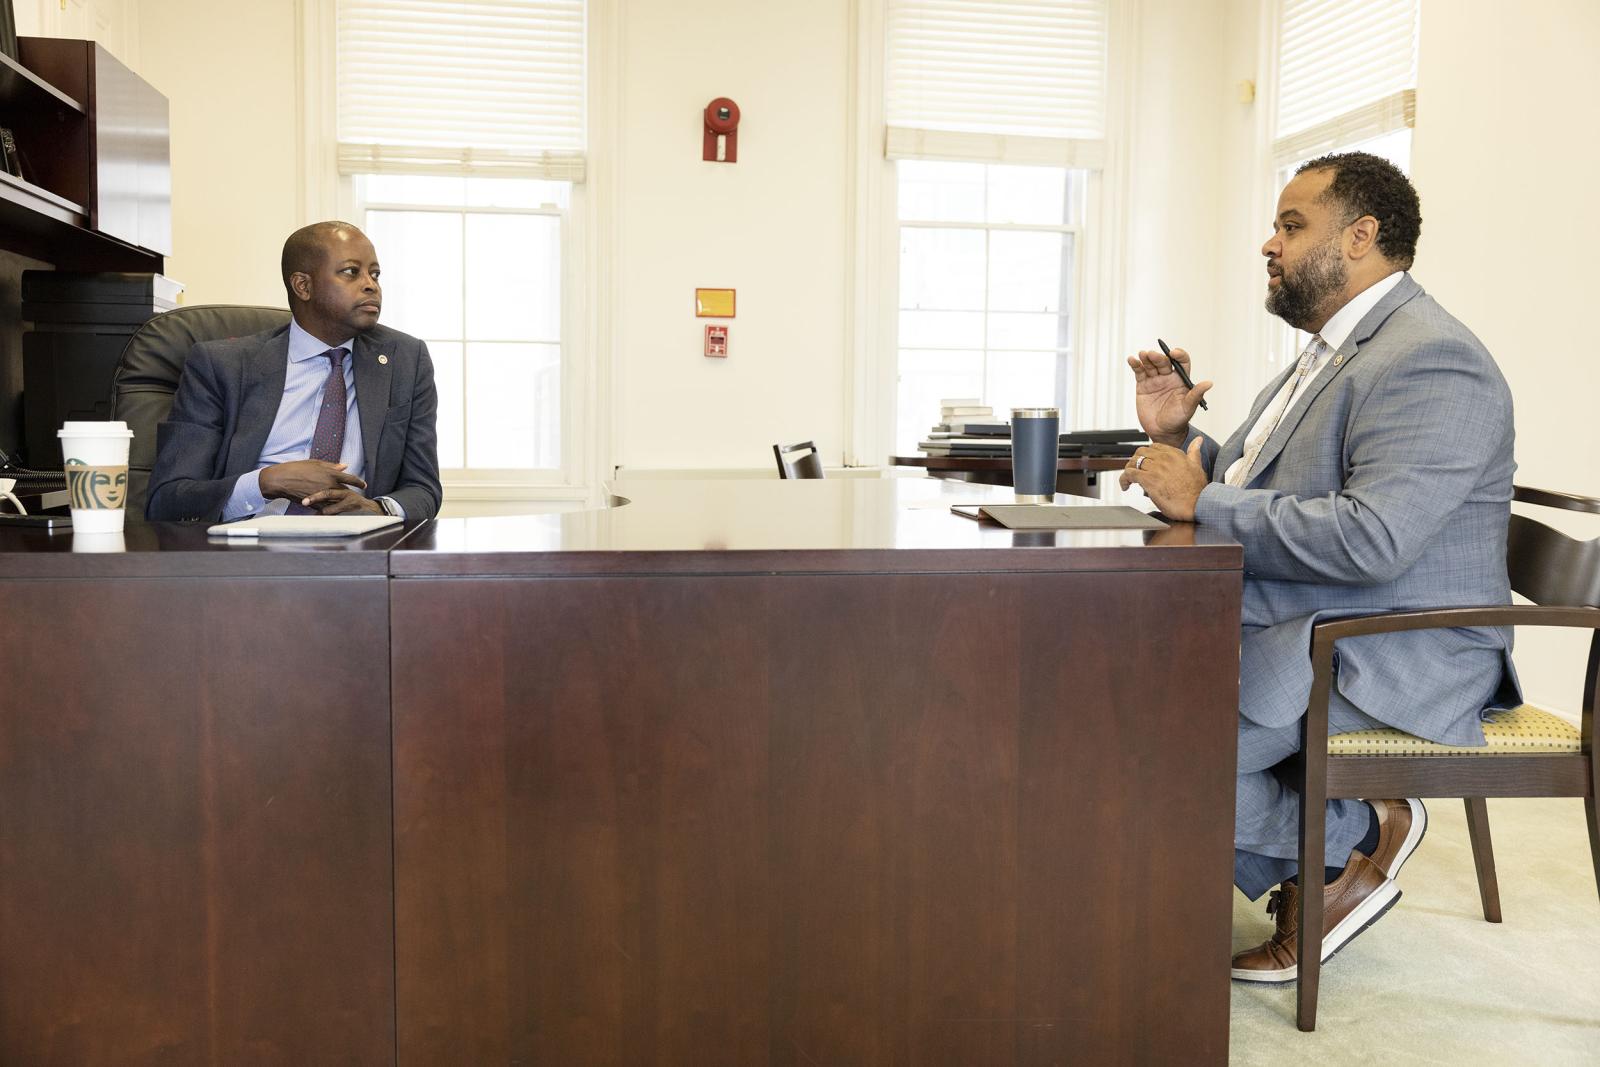 Dr. Frederick with Rashad Young in his office